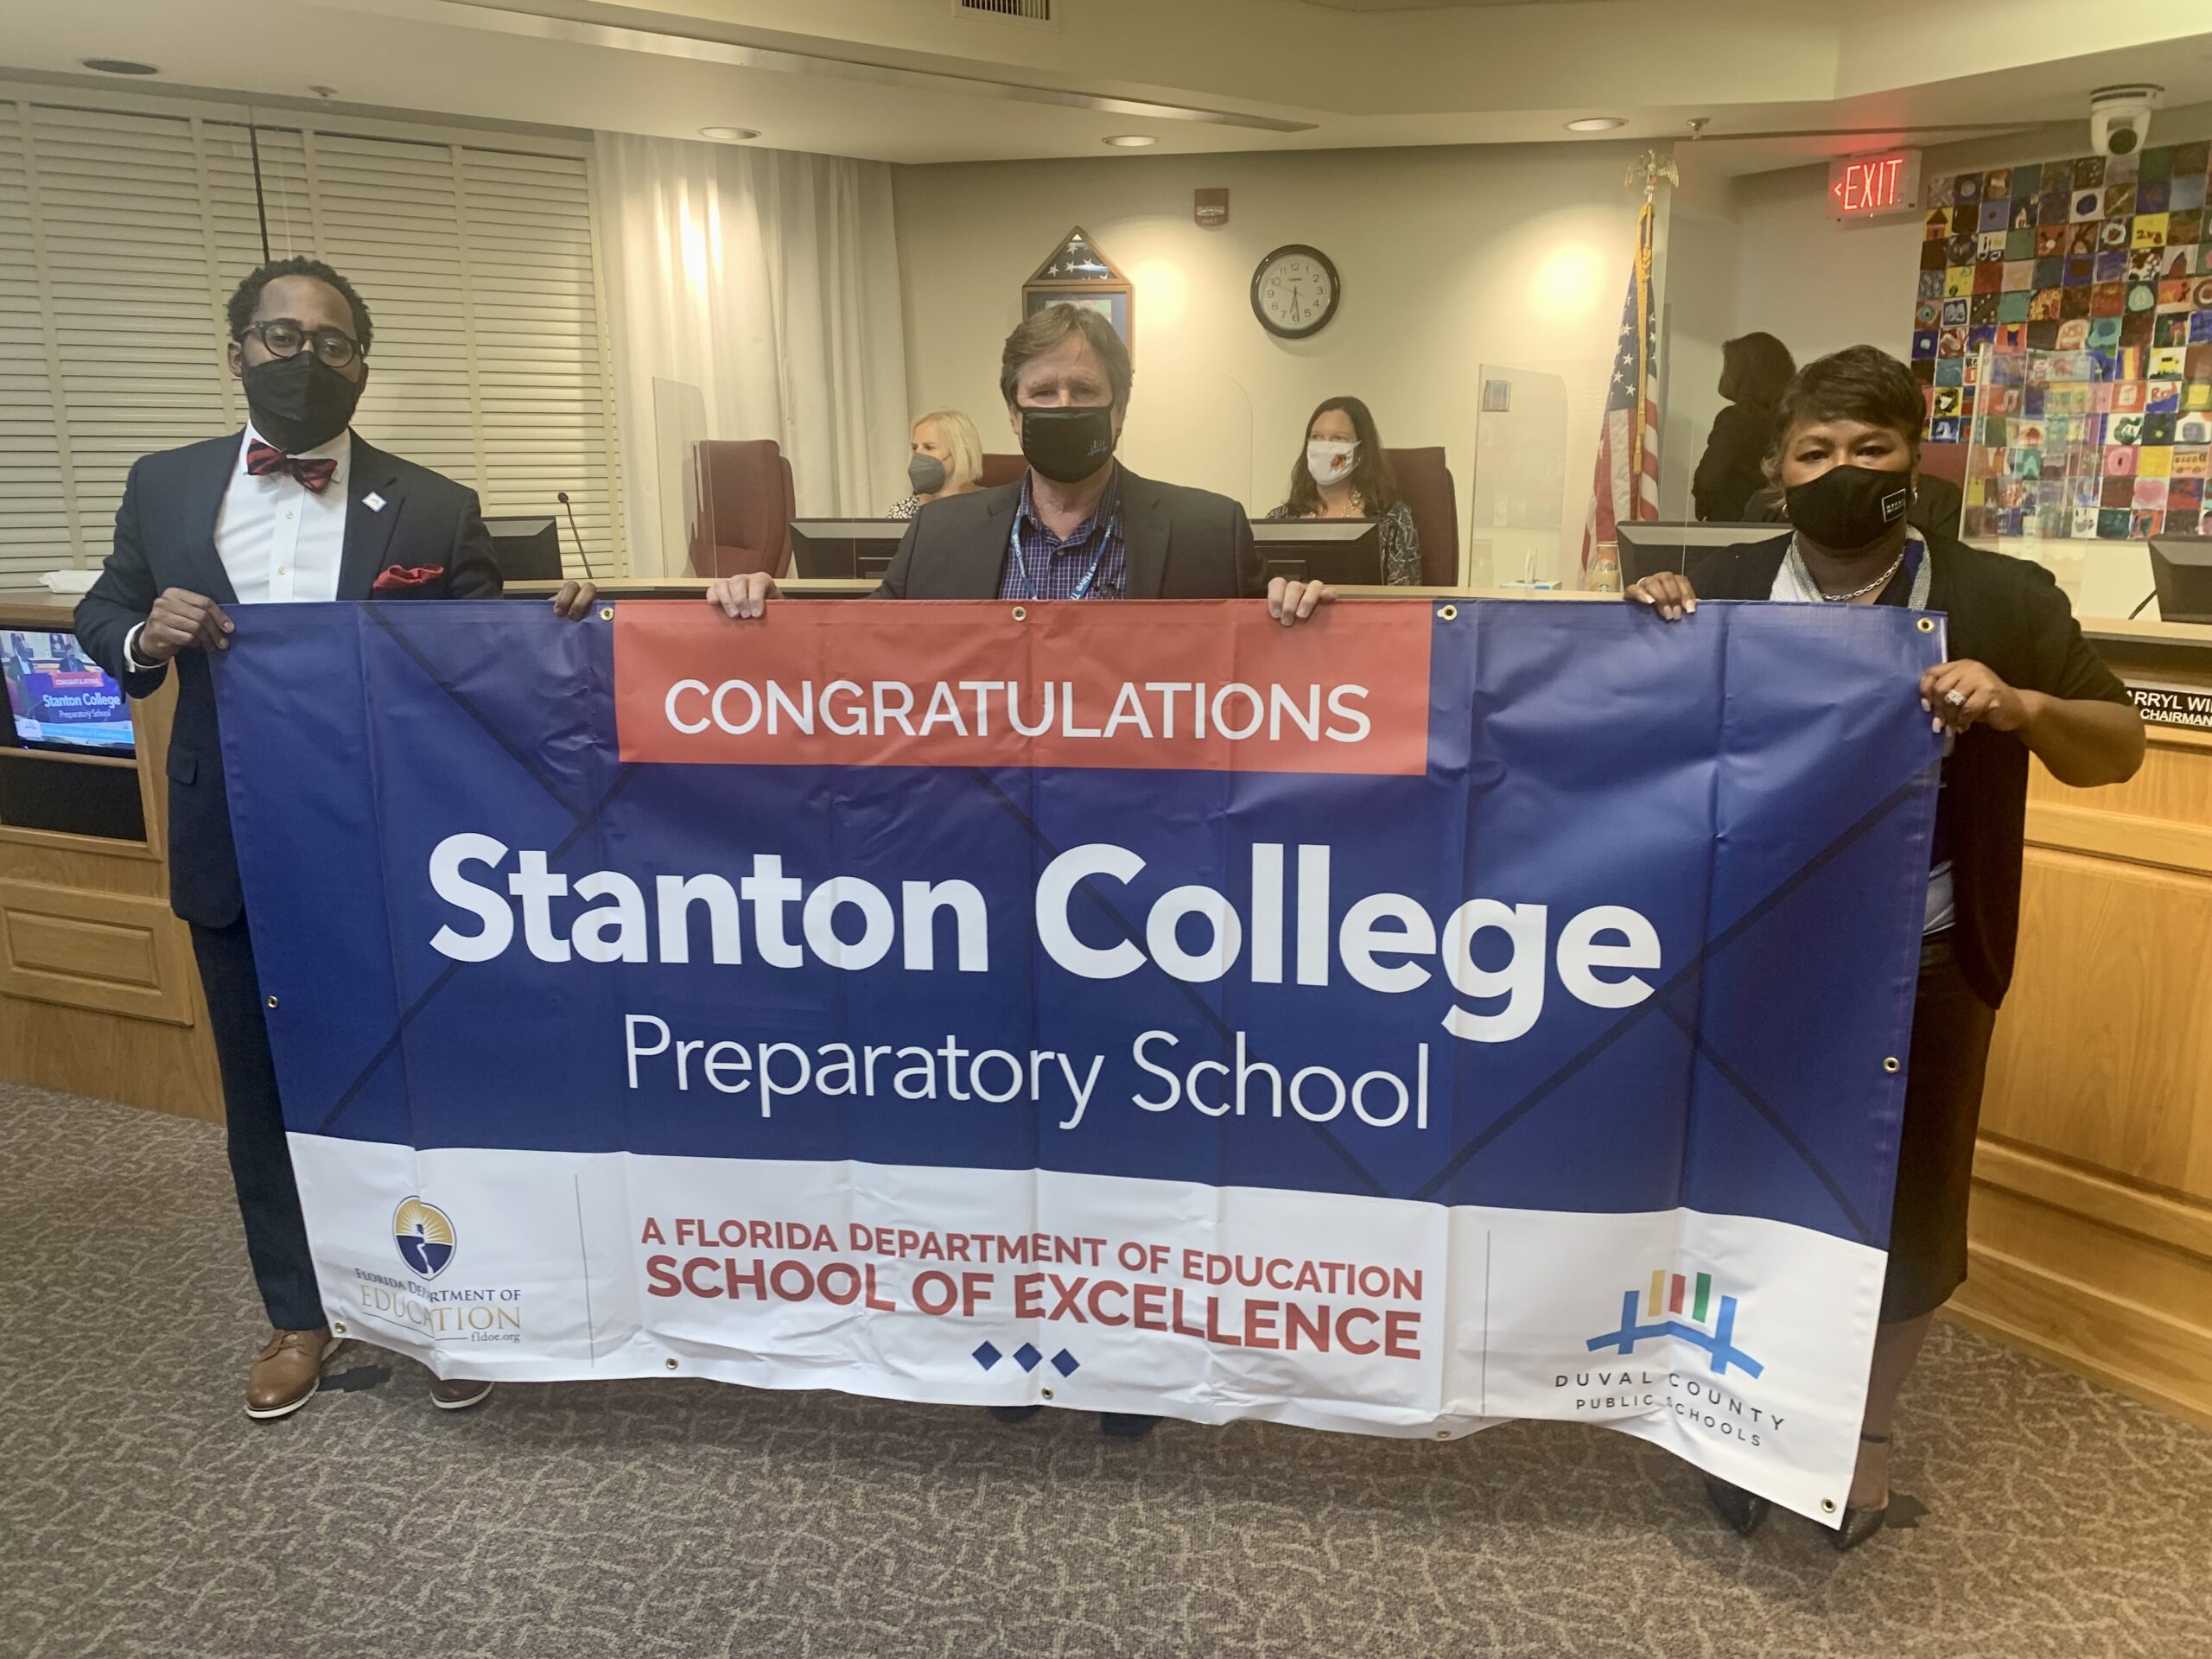 Superintendent, Board Chairman and school administrator hold banner Congratulations Stanton College Preparatory School a Florida Department of Education School of Excellence